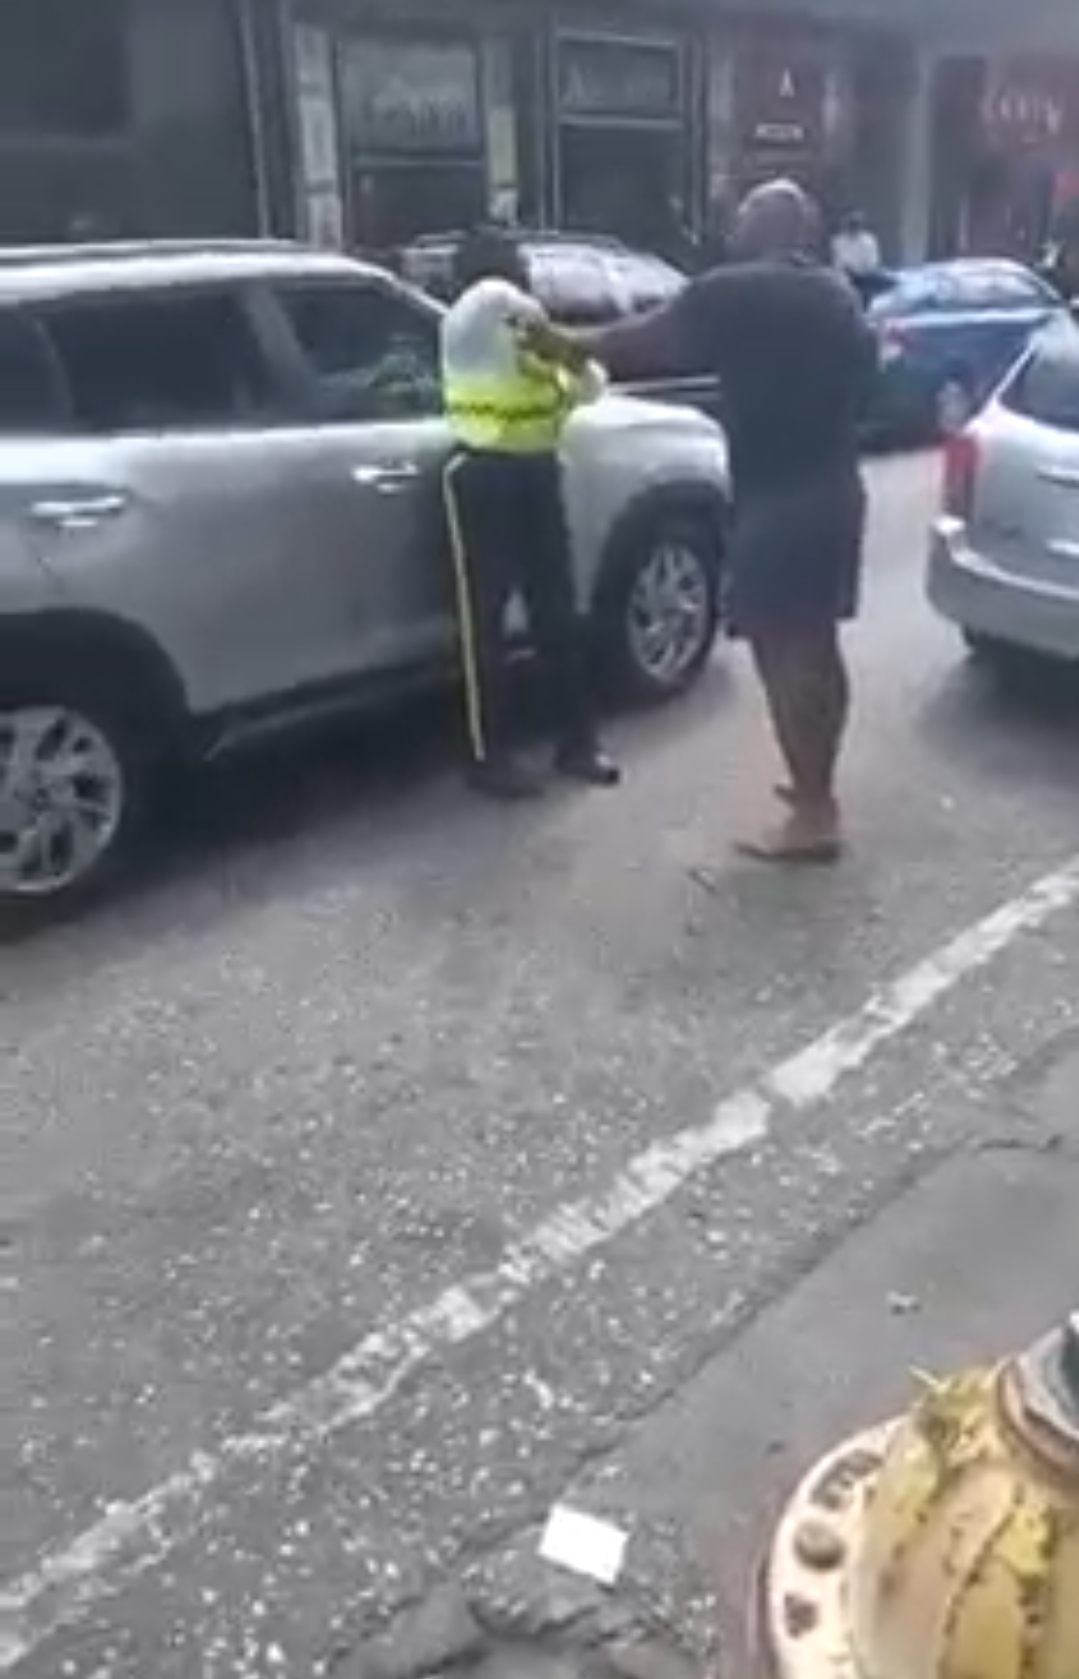 Traffic Warden handcuffed by off-duty cop for asking to show his ID